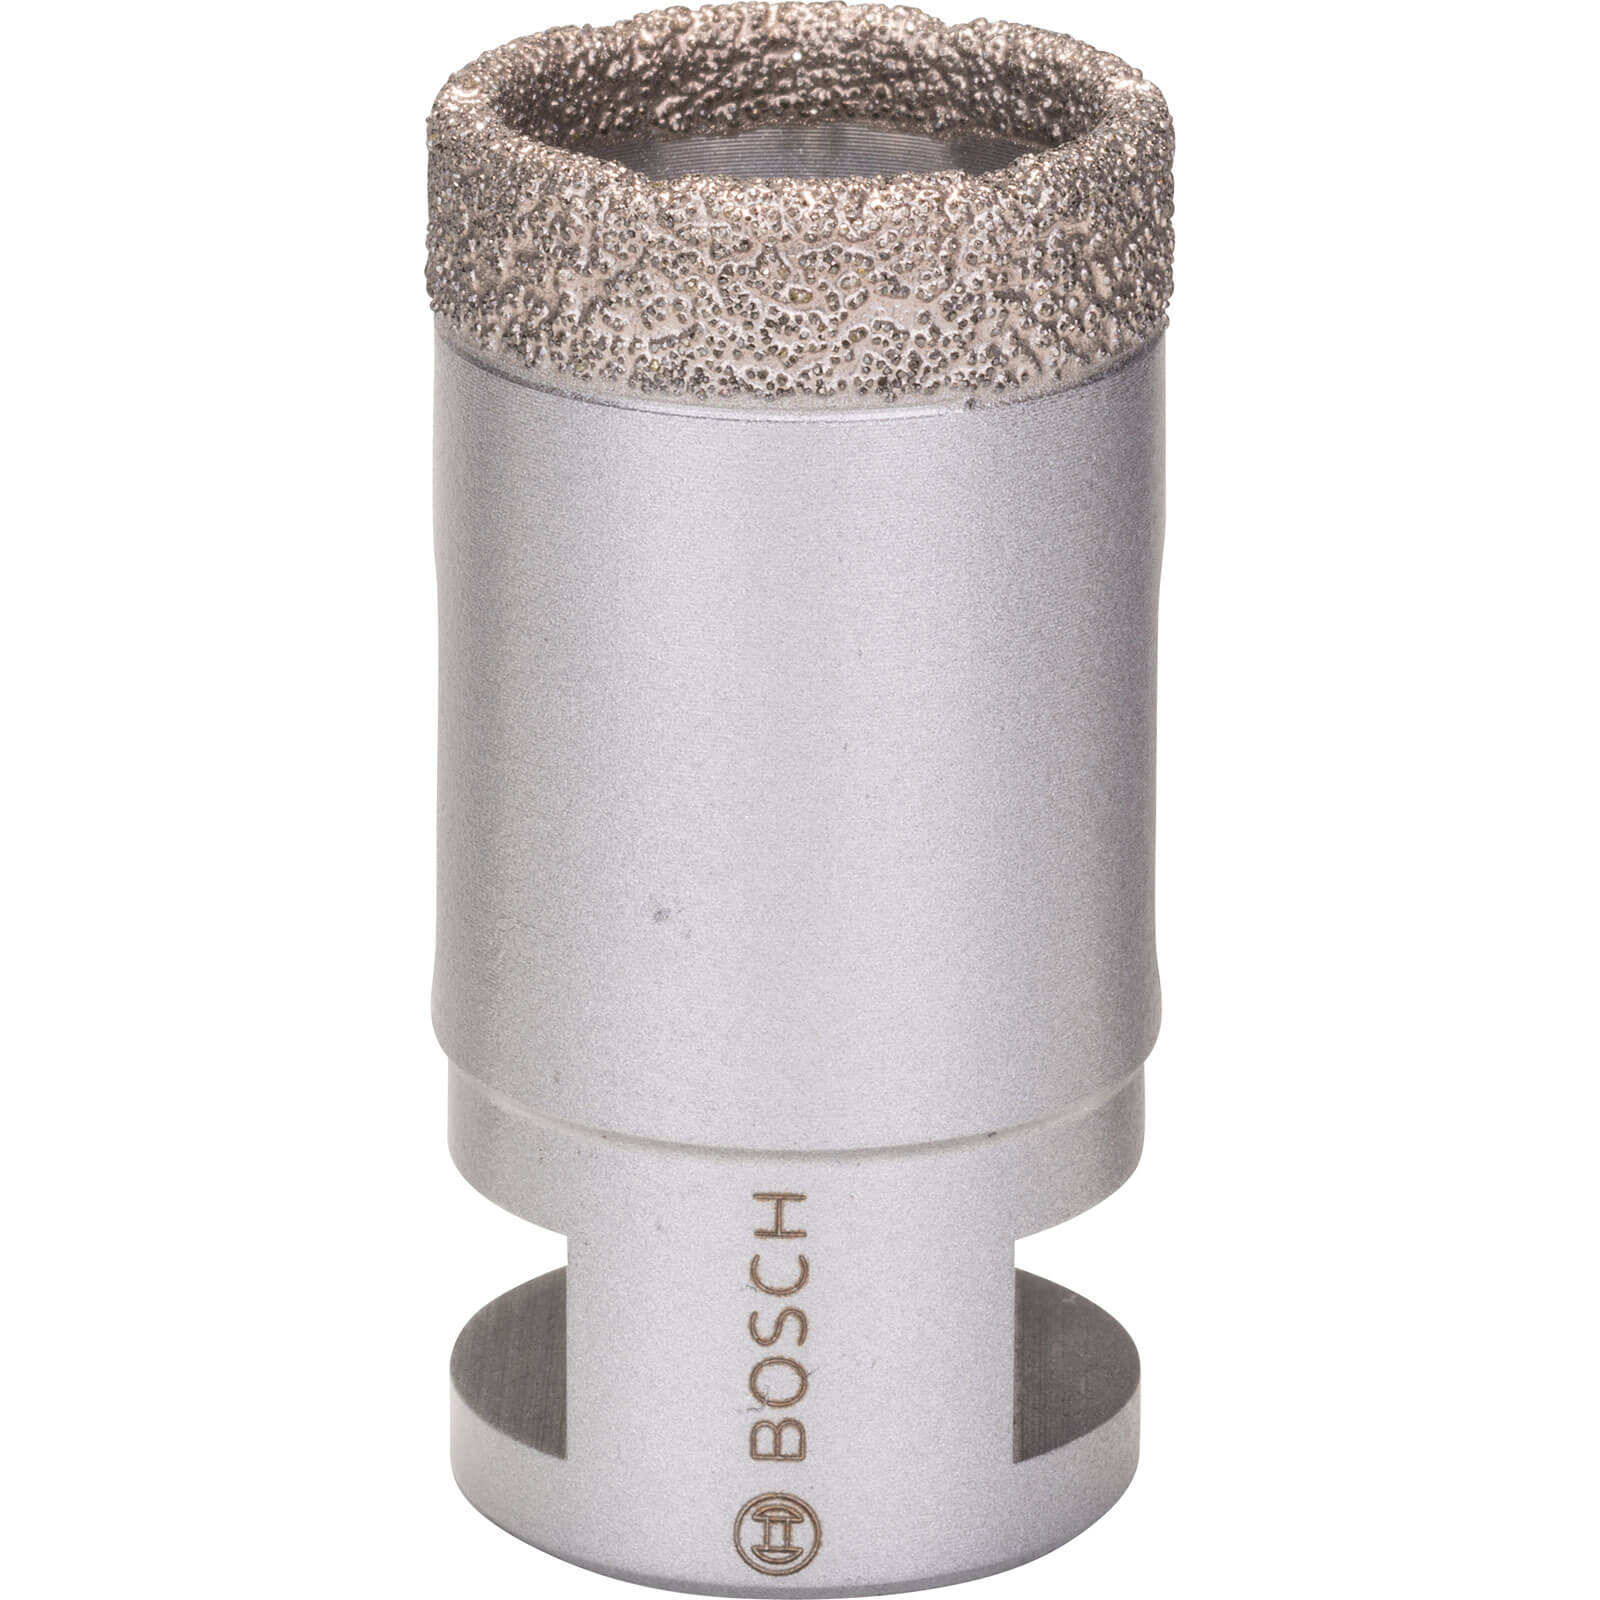 Photo of Bosch Angle Grinder Dry Diamond Hole Cutter For Ceramics 32mm